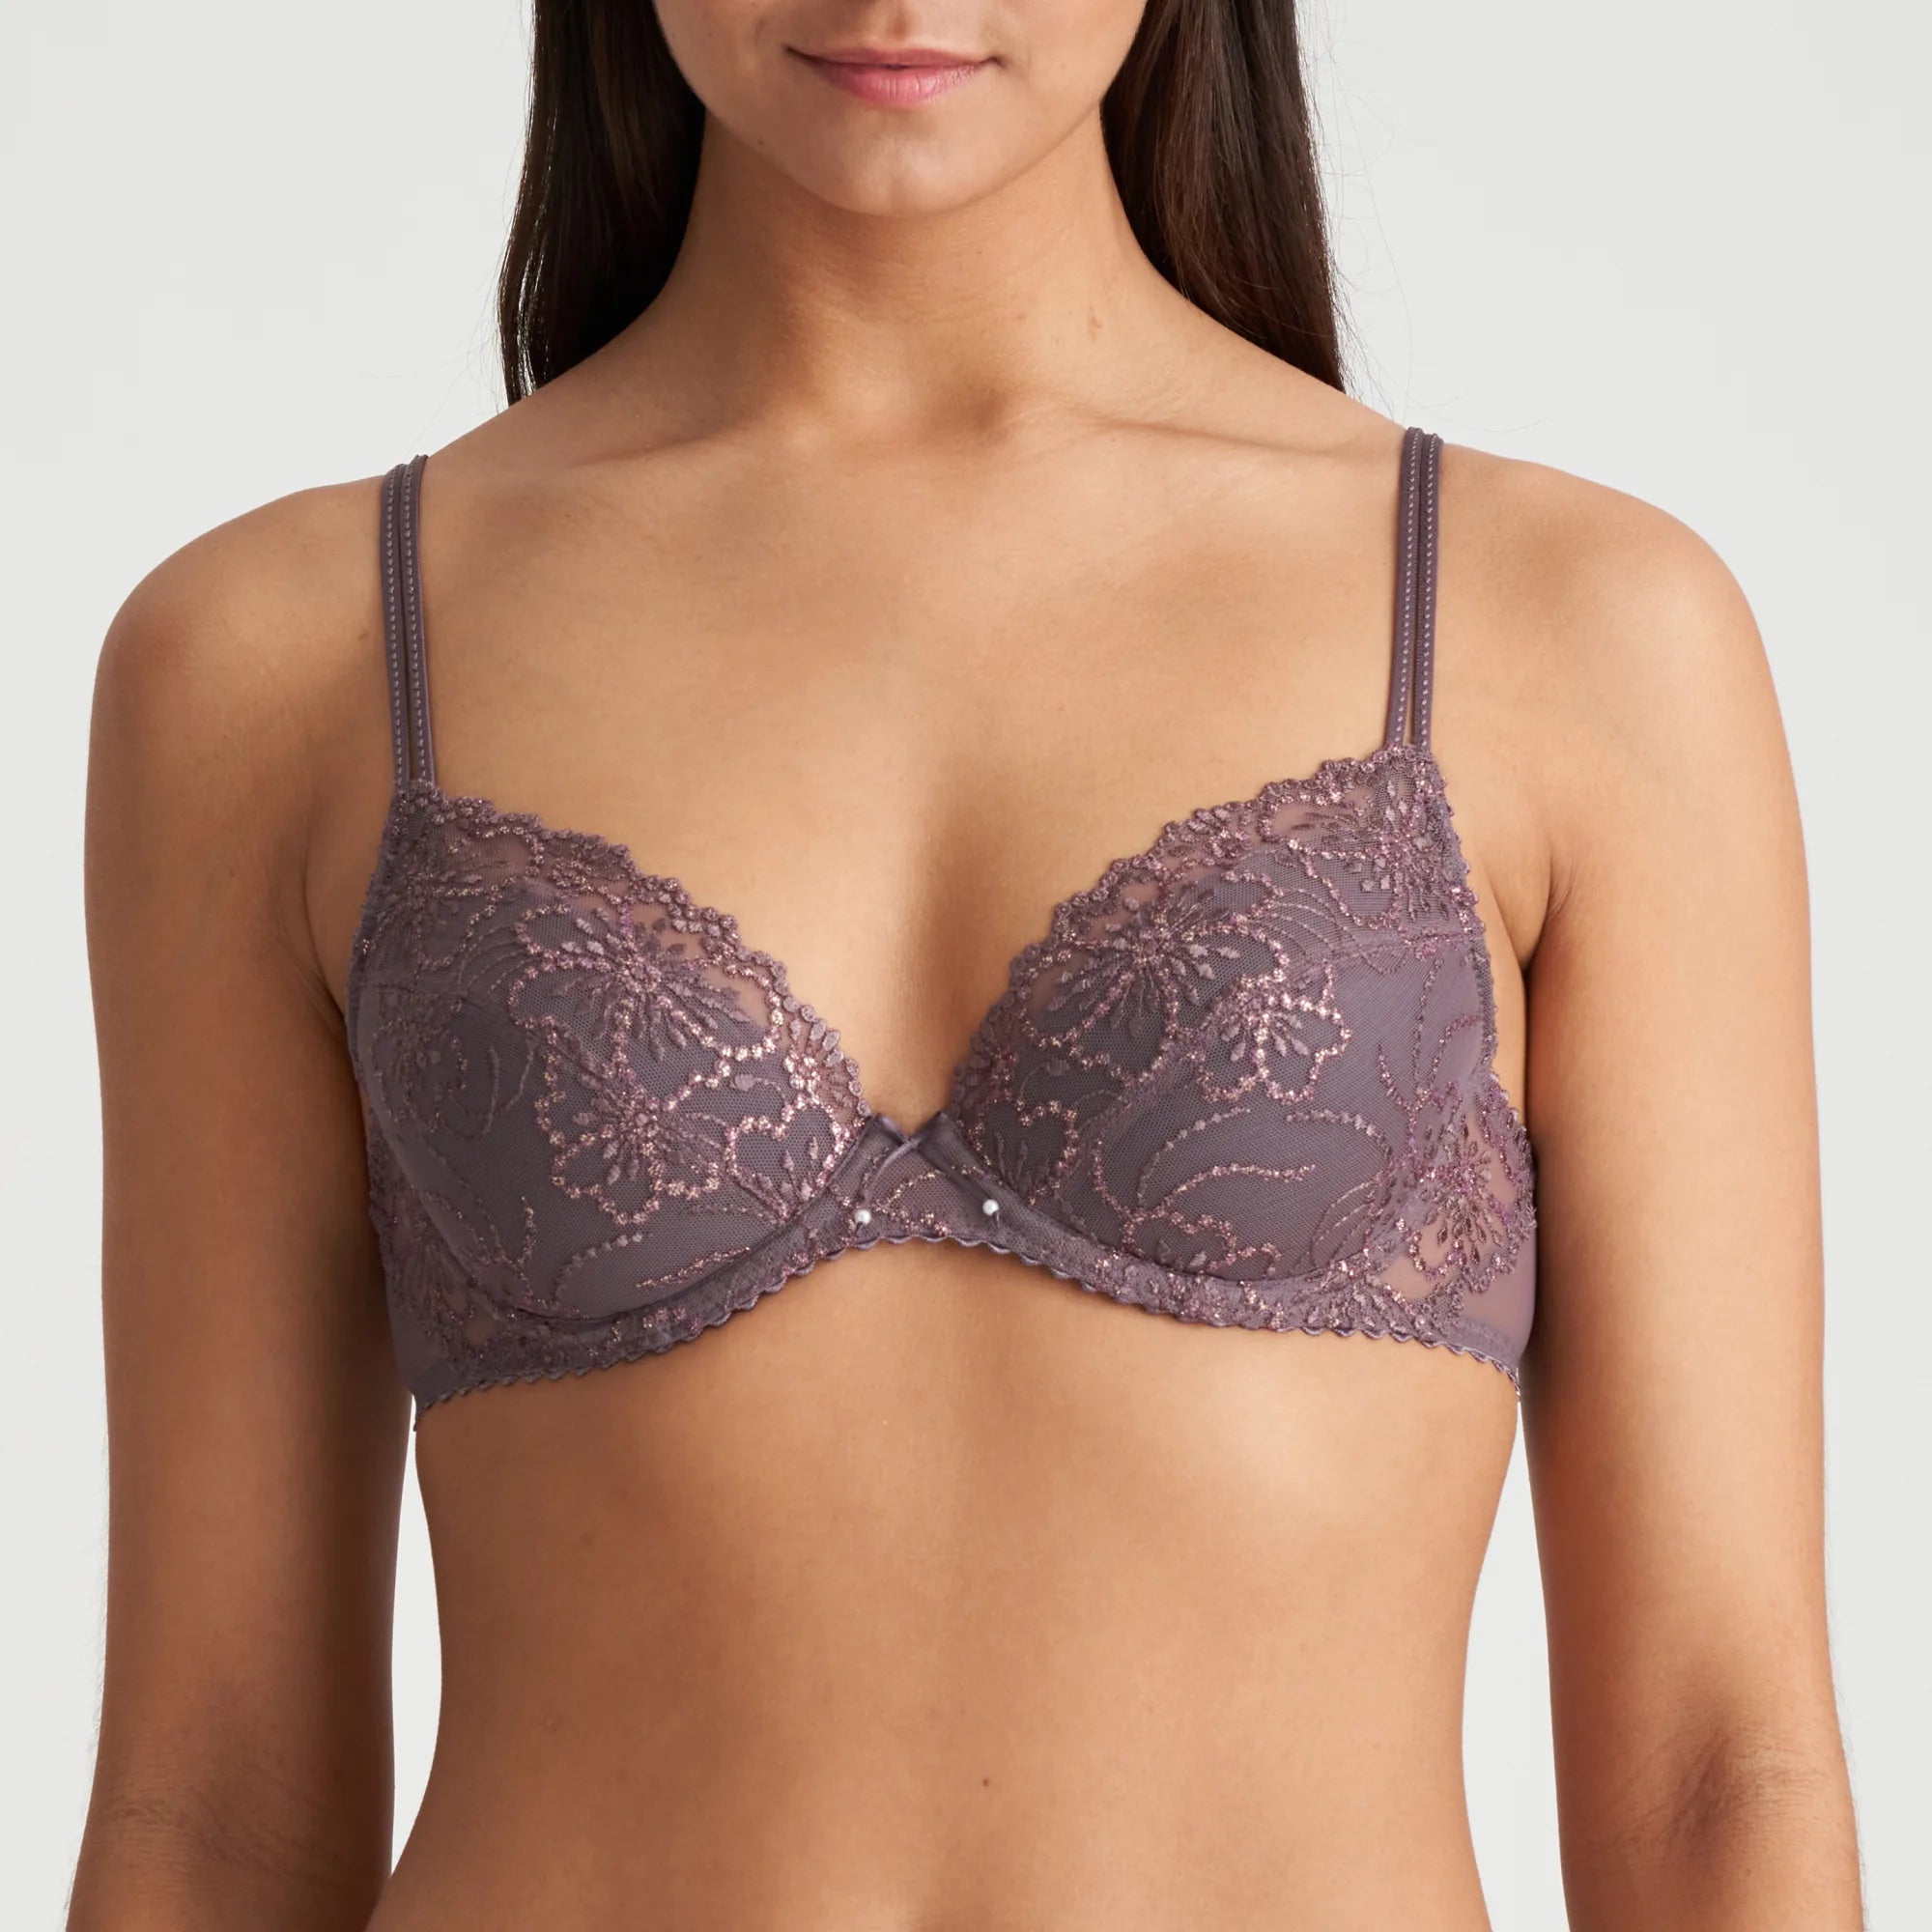 Up to 63% off the Ahh Bra (3 Options - Shipping Included